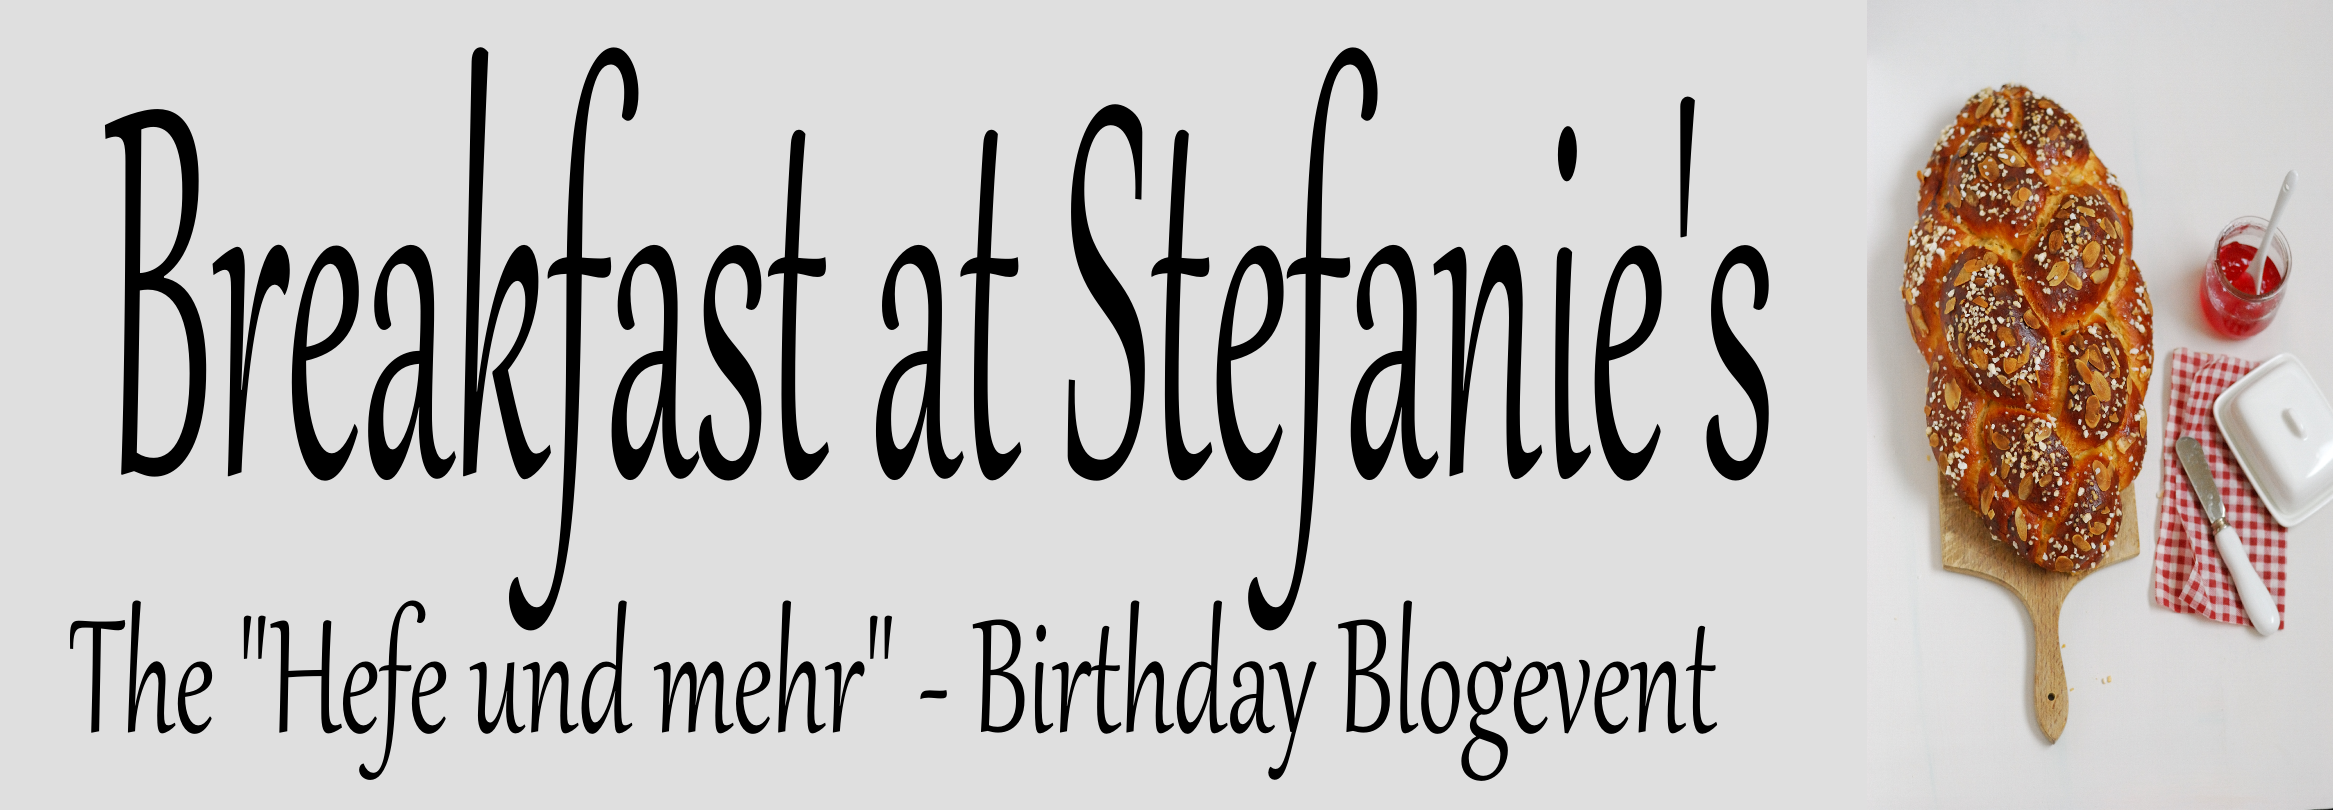 Breakfast at Stefanie’s – Birthday Blog event with give away (last submission 09.12.14)